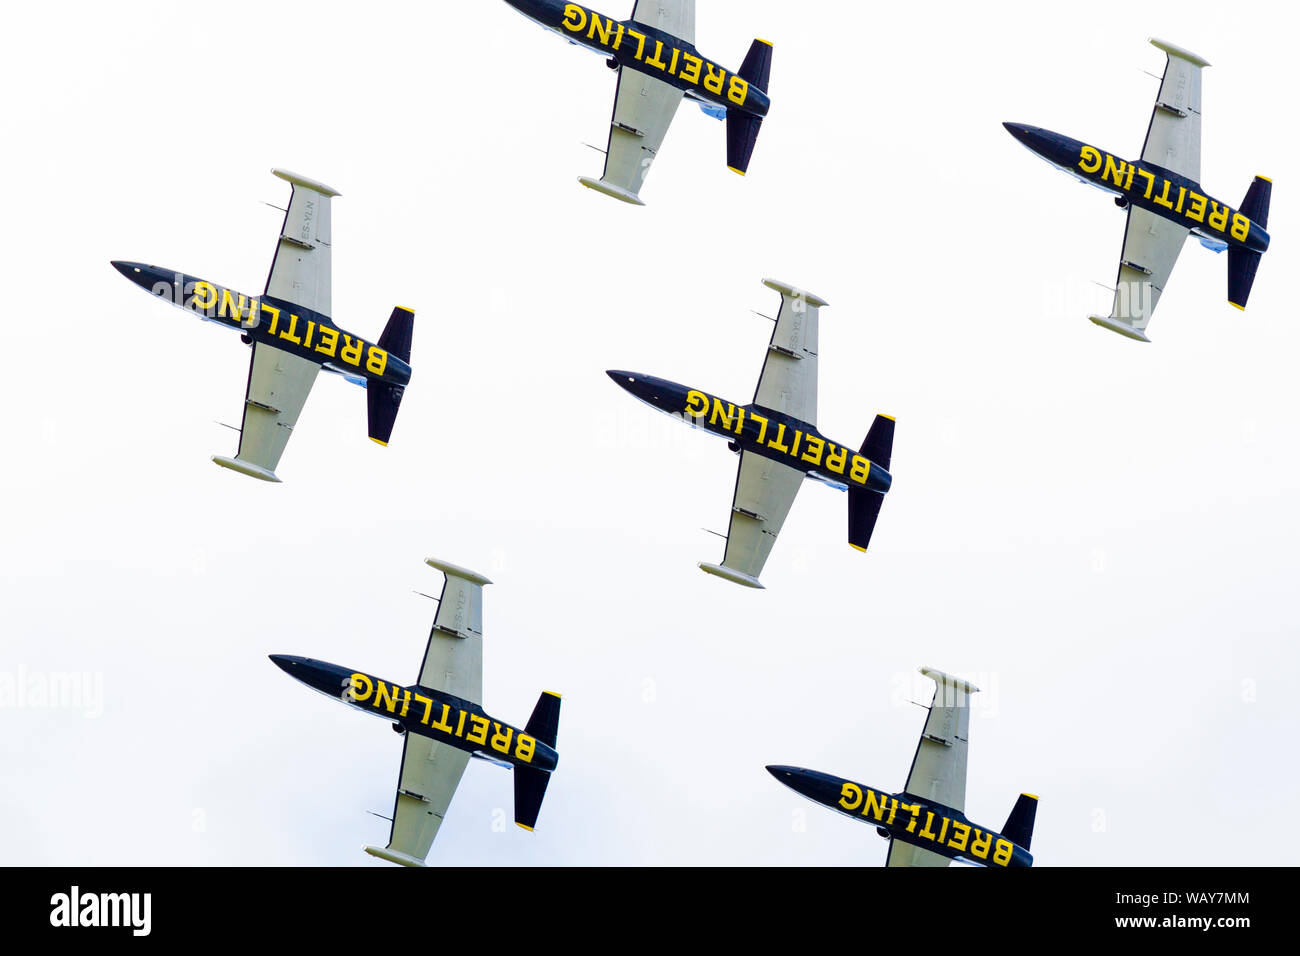 Breitling Jet Team.  The World's largest professional civilian aerobatics team performing on jets.  Made up of 7 L-39C Albatros aircraft. Stock Photo